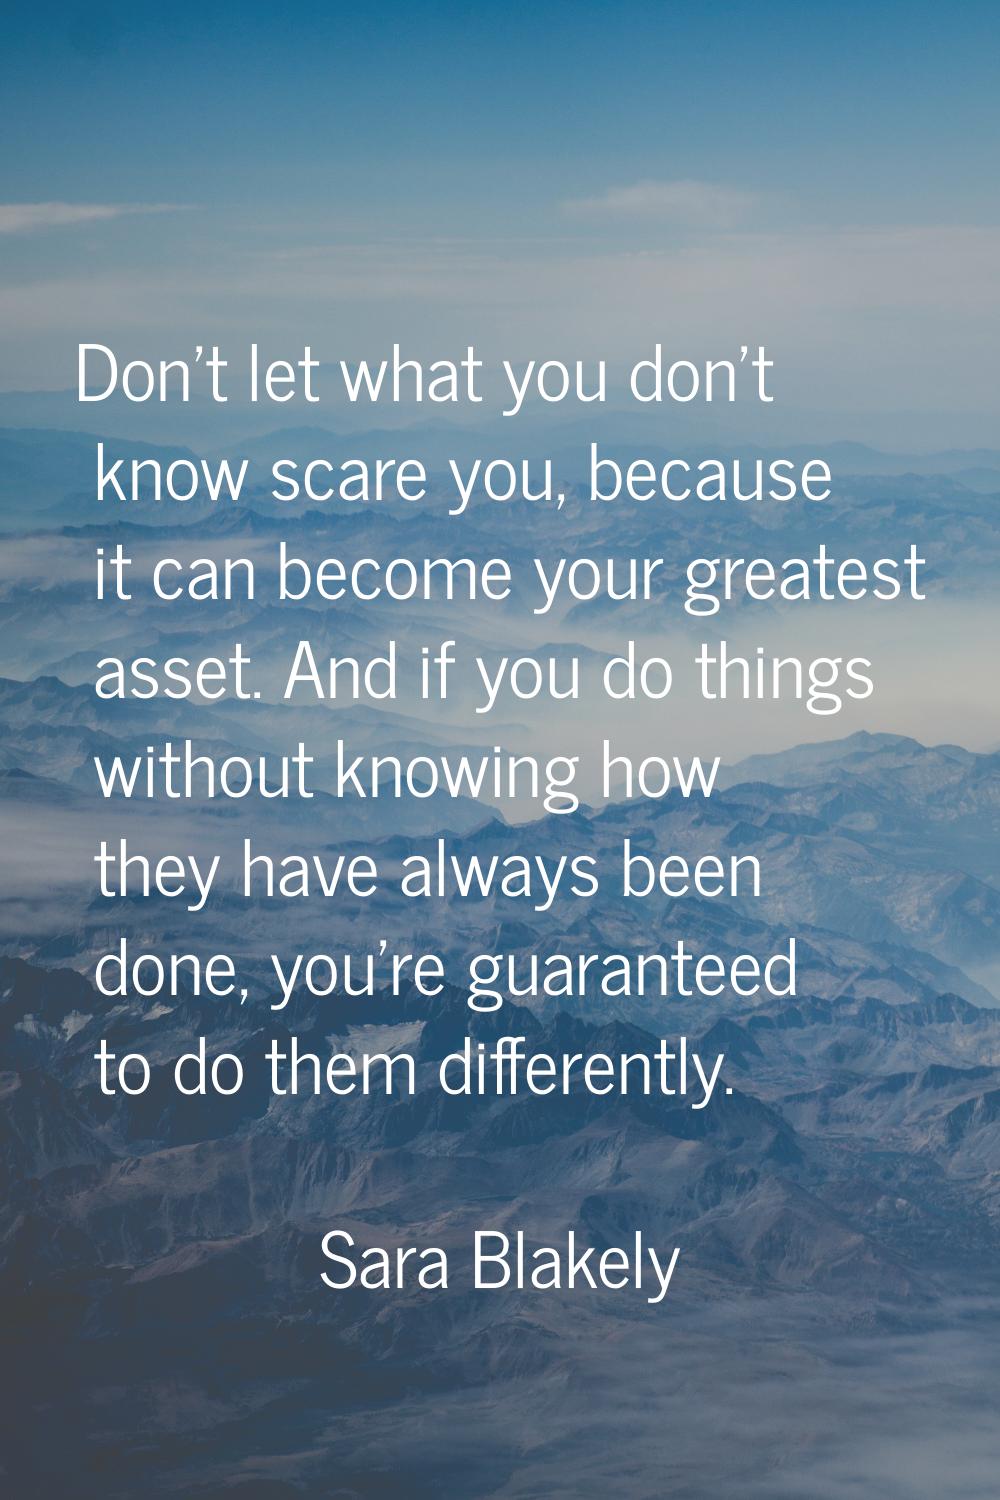 Don't let what you don't know scare you, because it can become your greatest asset. And if you do t